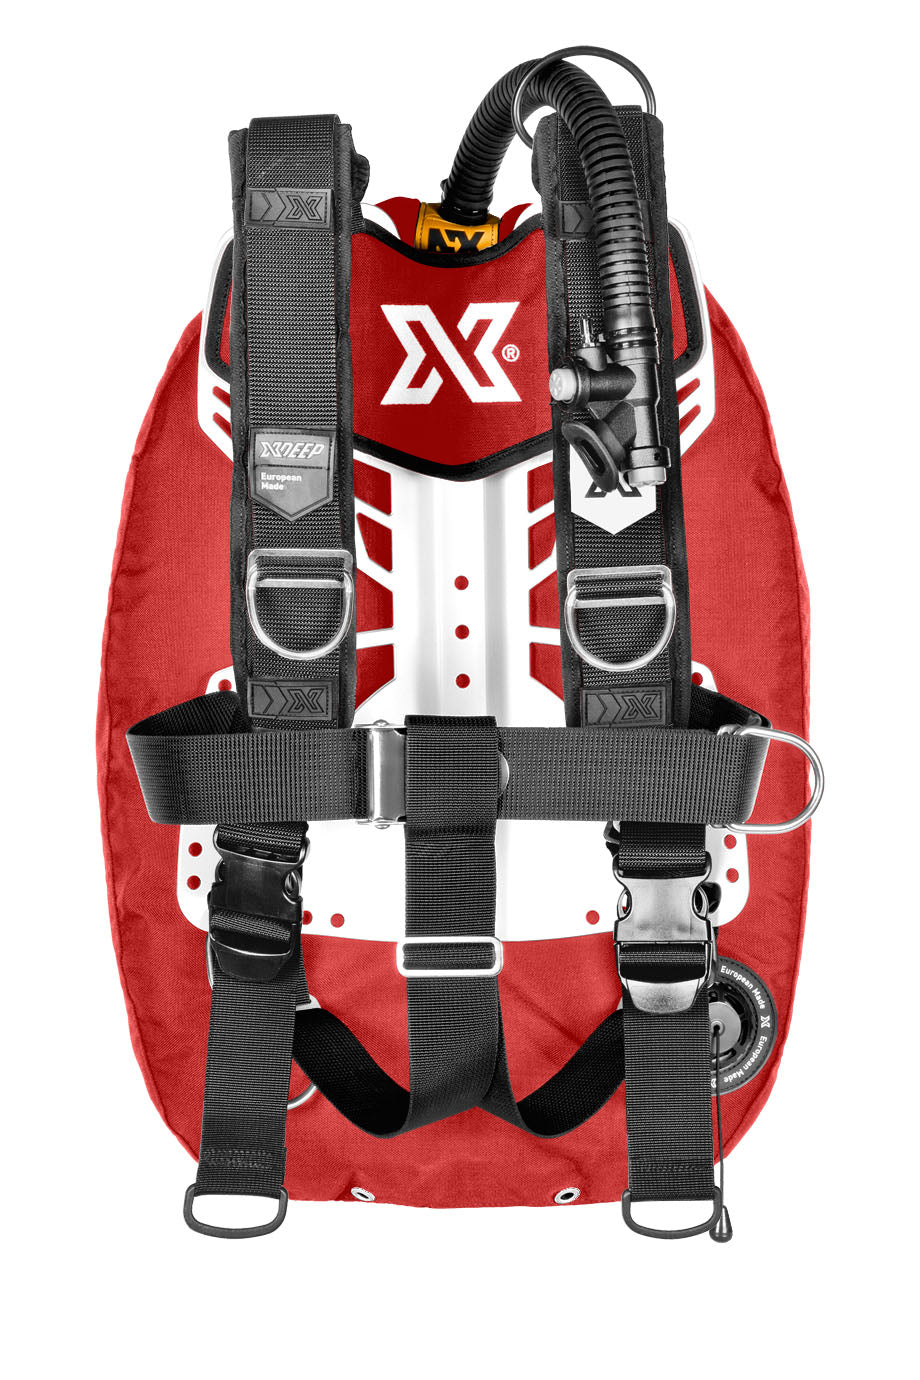 XDEEP XDEEP Zen Wing System Deluxe with Small / Red / Alumminium - Oyster Diving